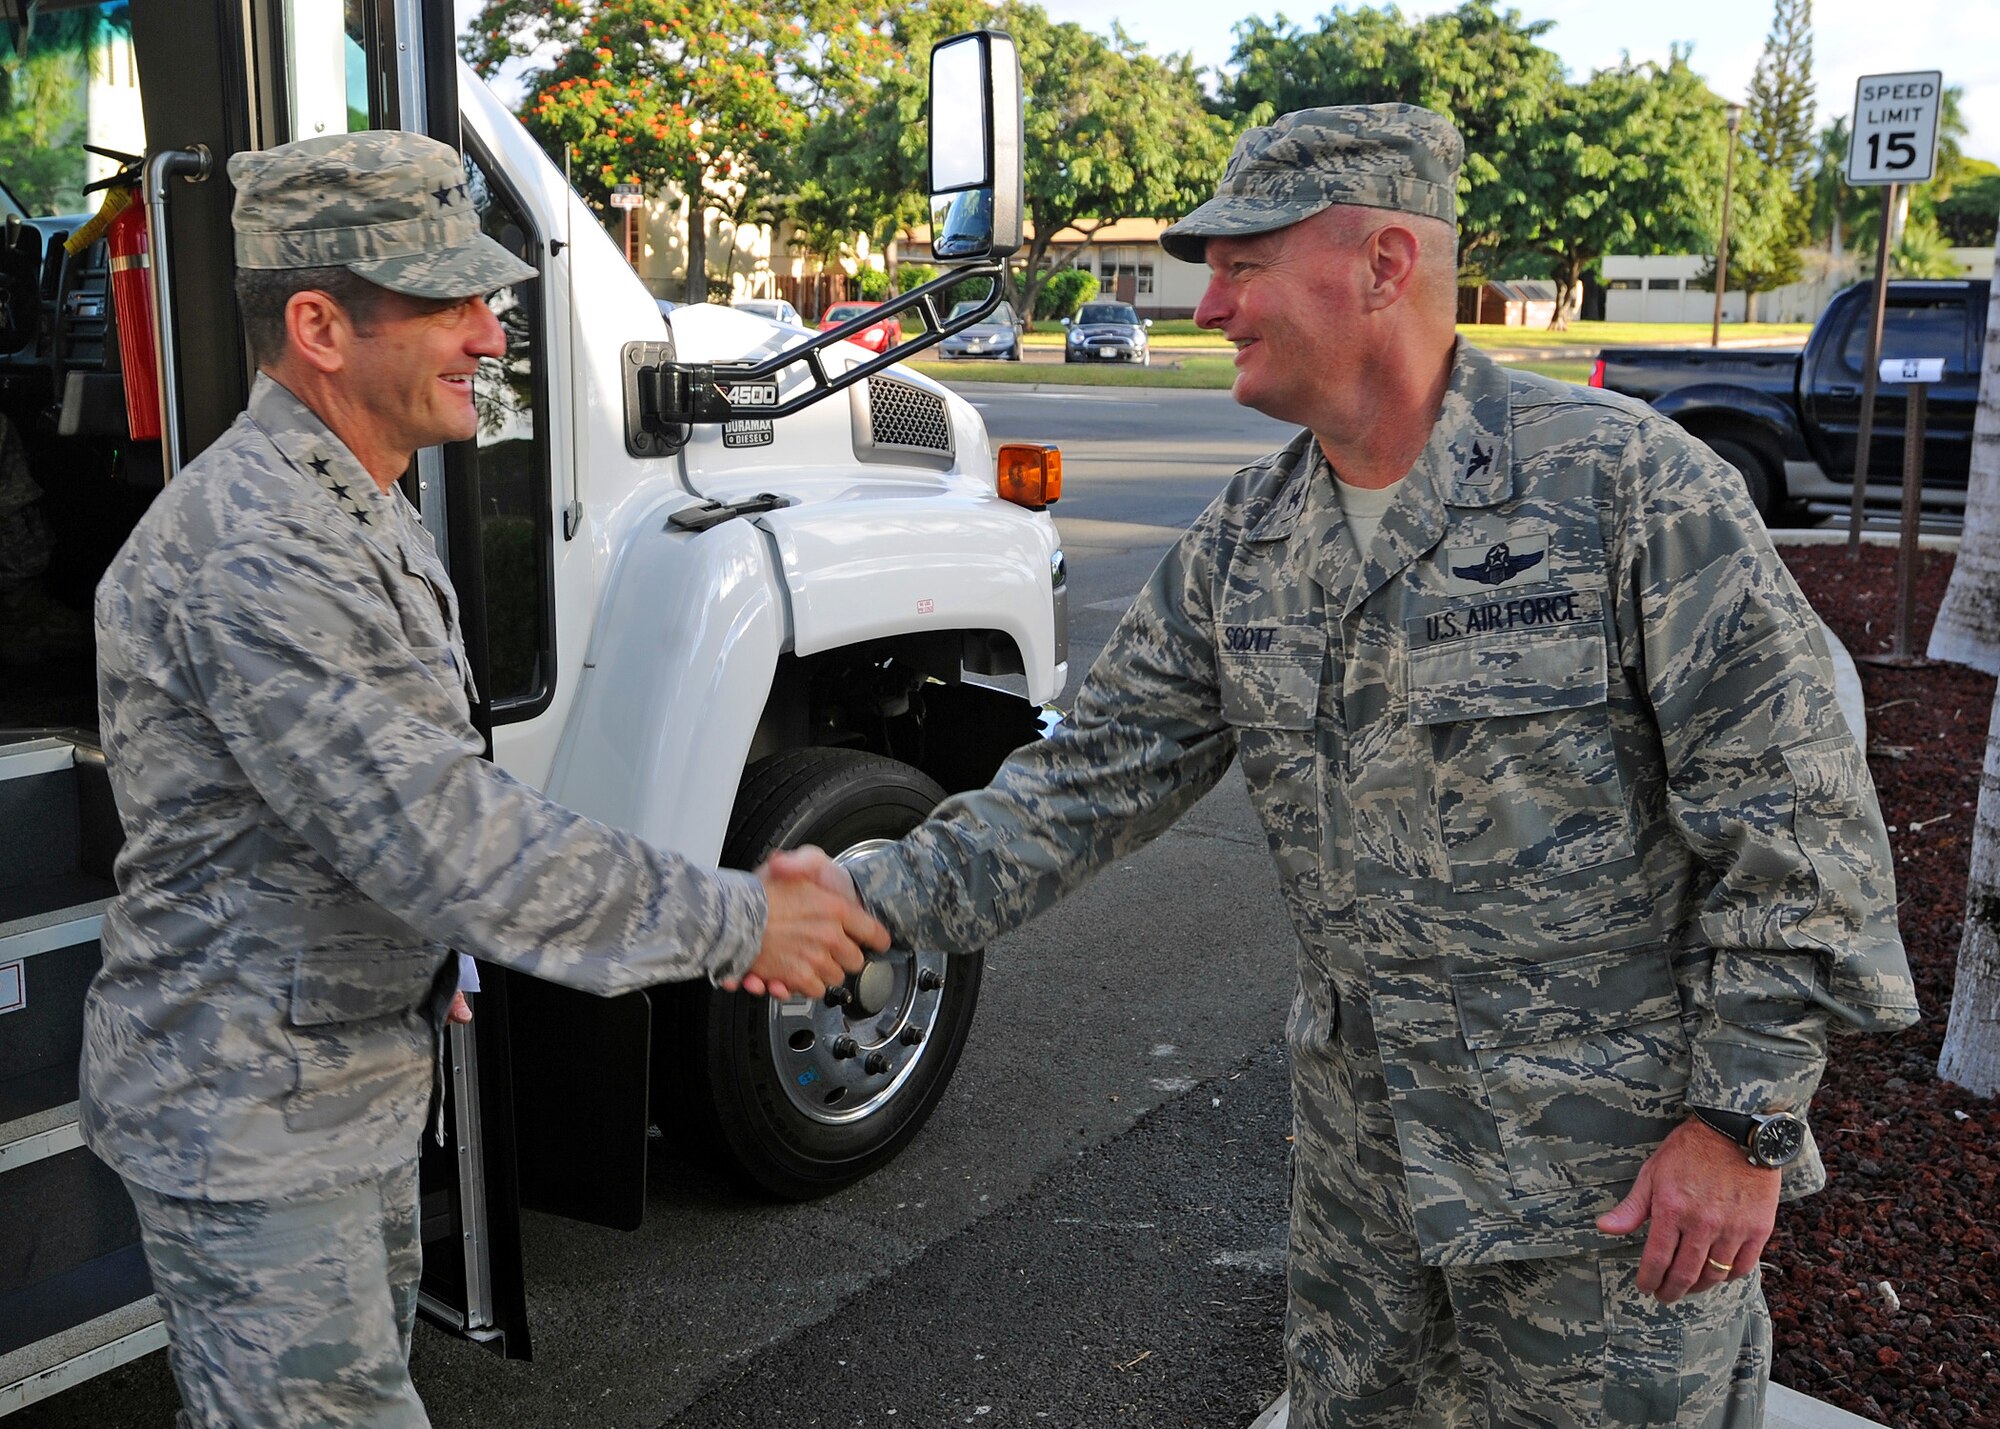 Lt. Gen. Russell Handy, 11th Air Force commander, greeted by Col. Terry Scott, 15th Wing vice commander, shortly after his arrival, during a visit to the 15th Wing headquarters, Joint Base Pearl-Harbor Hickam, Hawaii, Jan. 21, 2014.  Handy visited the wing to meet with JBPHH Airmen and for a familiarization base tour of JBPHH's unique operations. (U.S. Air Force photo/Master Sgt. Jerome S. Tayborn)